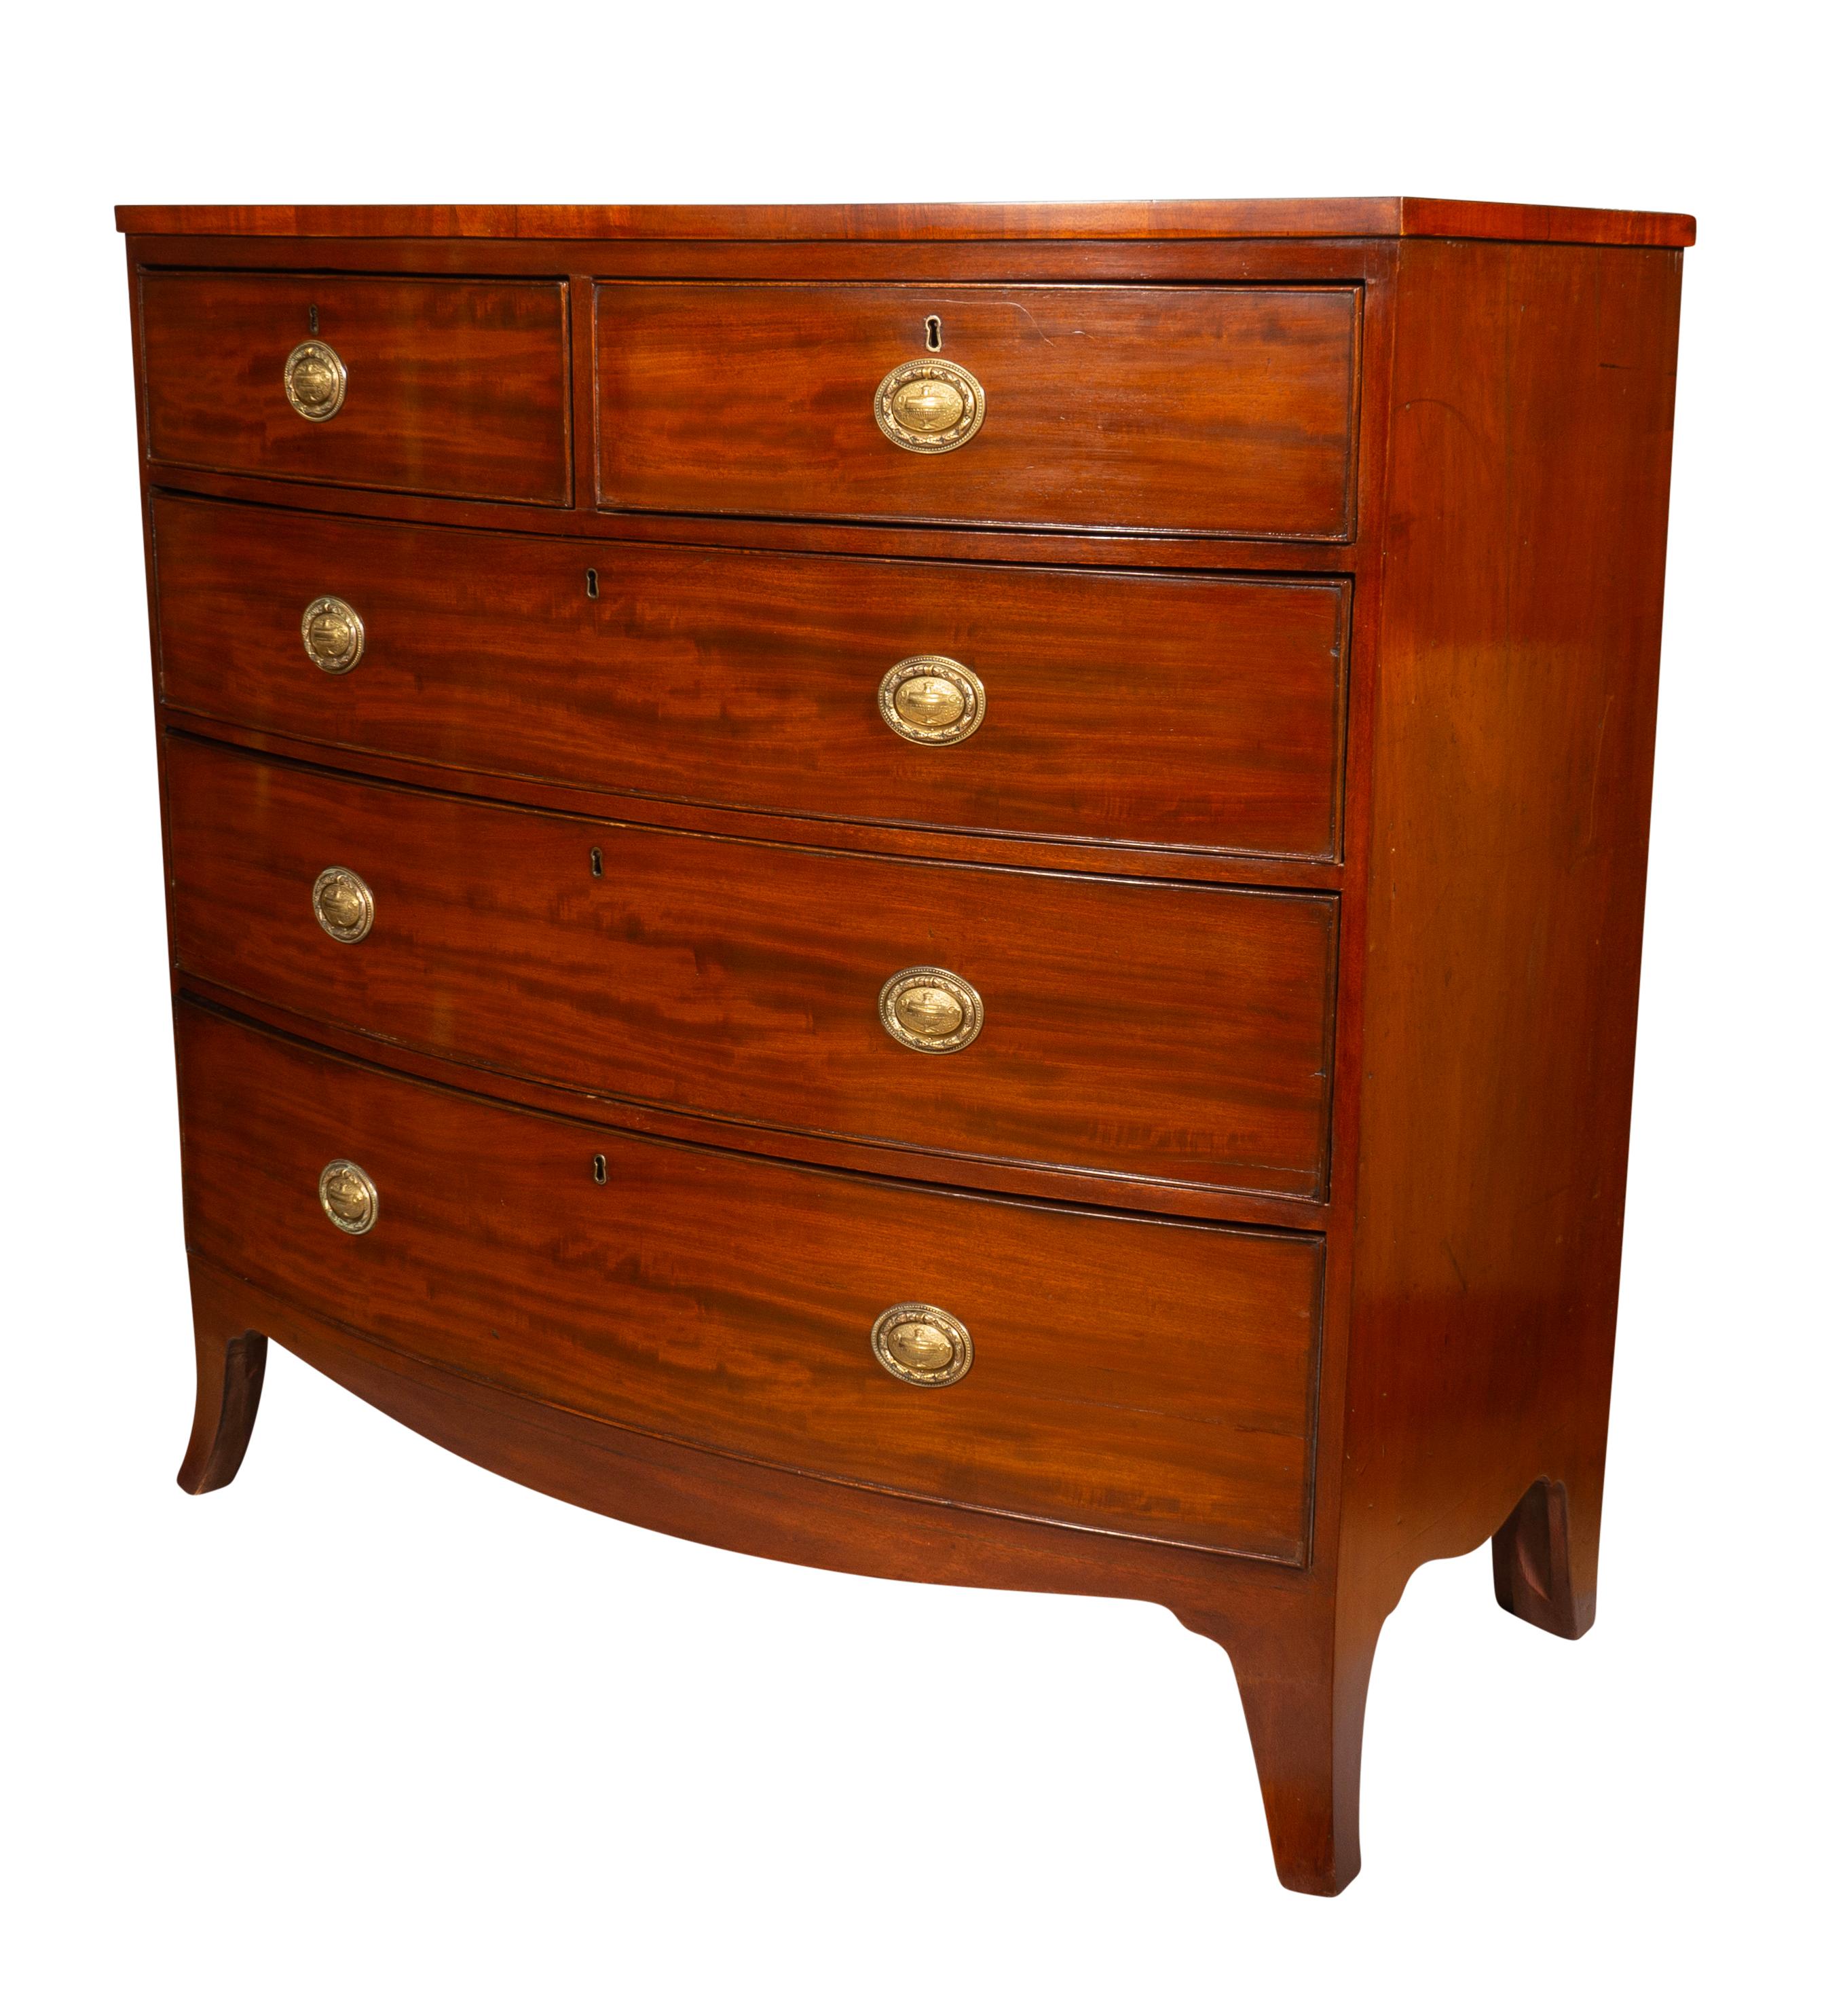 Brass Regency Mahogany Bow front Chest Of Drawers For Sale